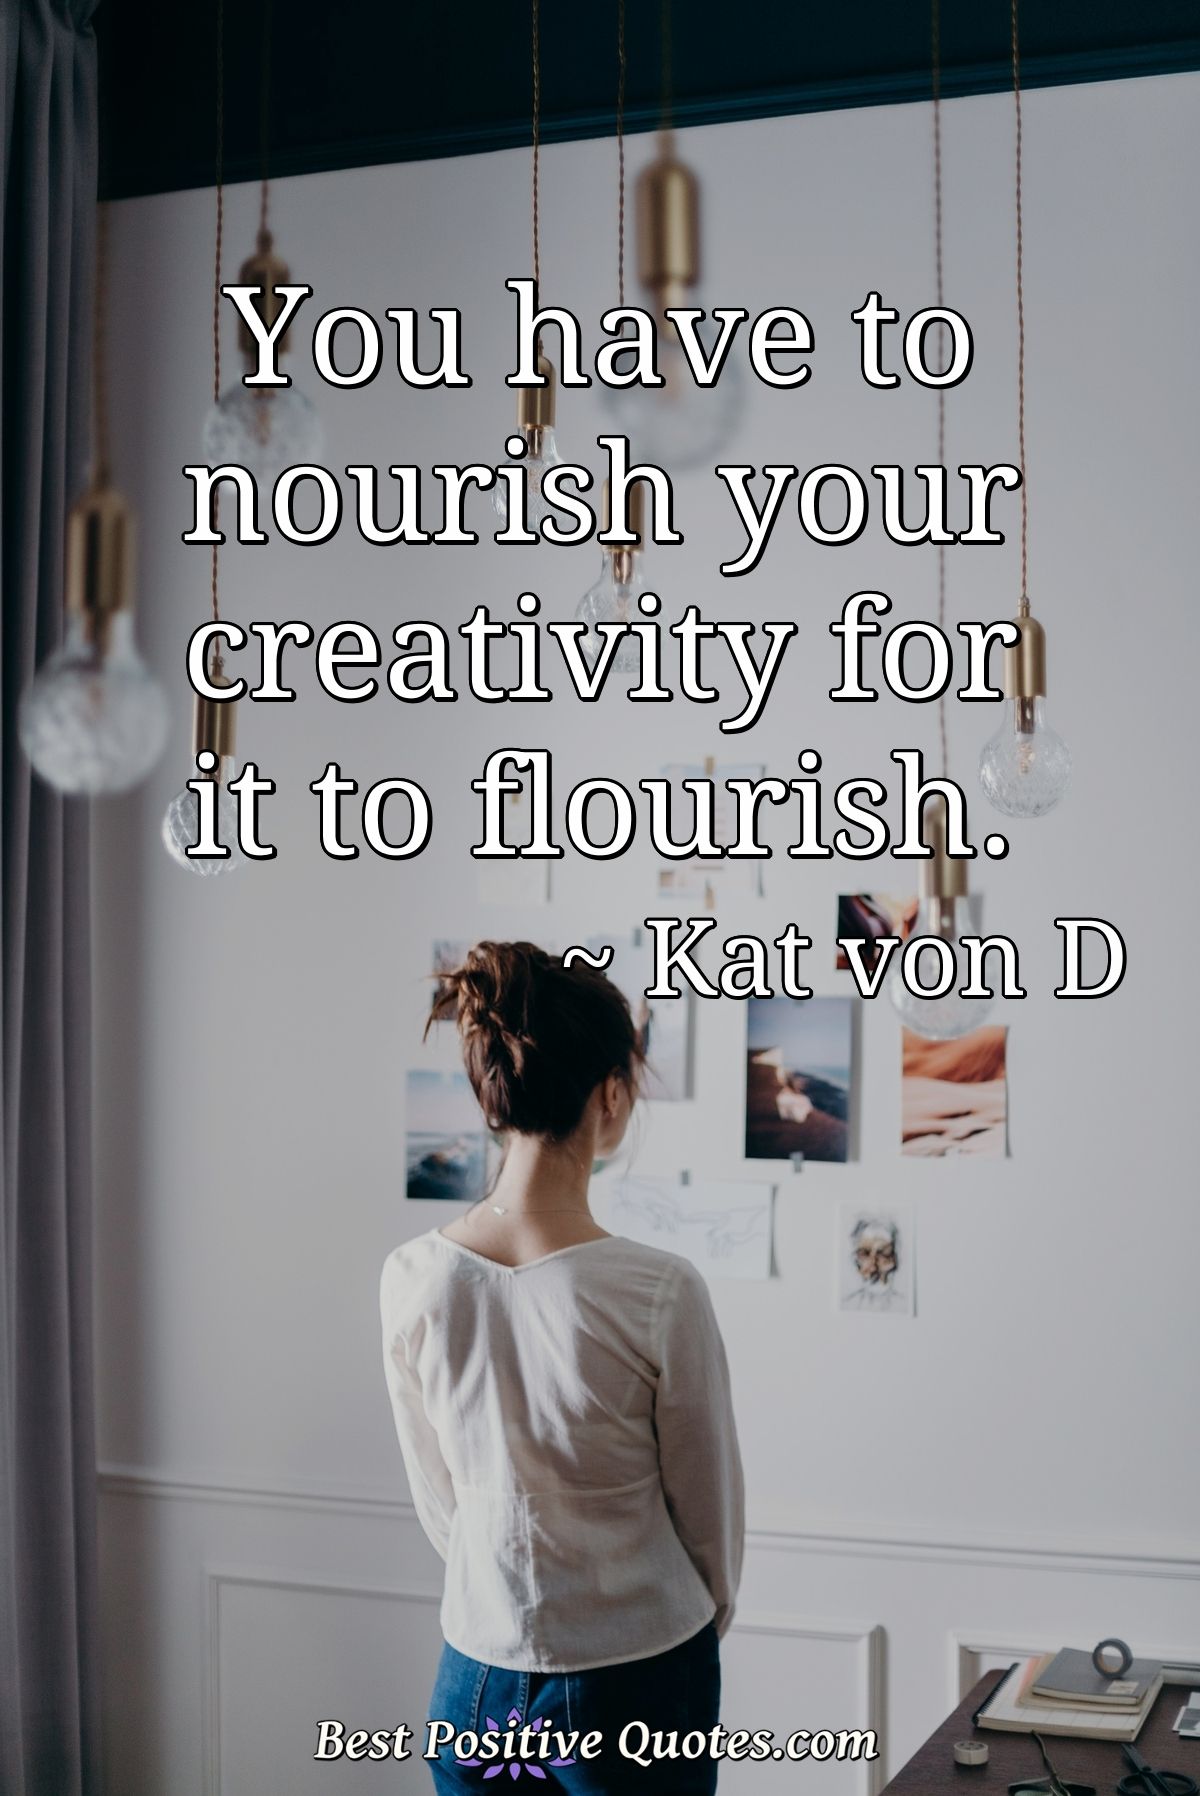 You have to nourish your creativity for it to flourish. - Kat von D